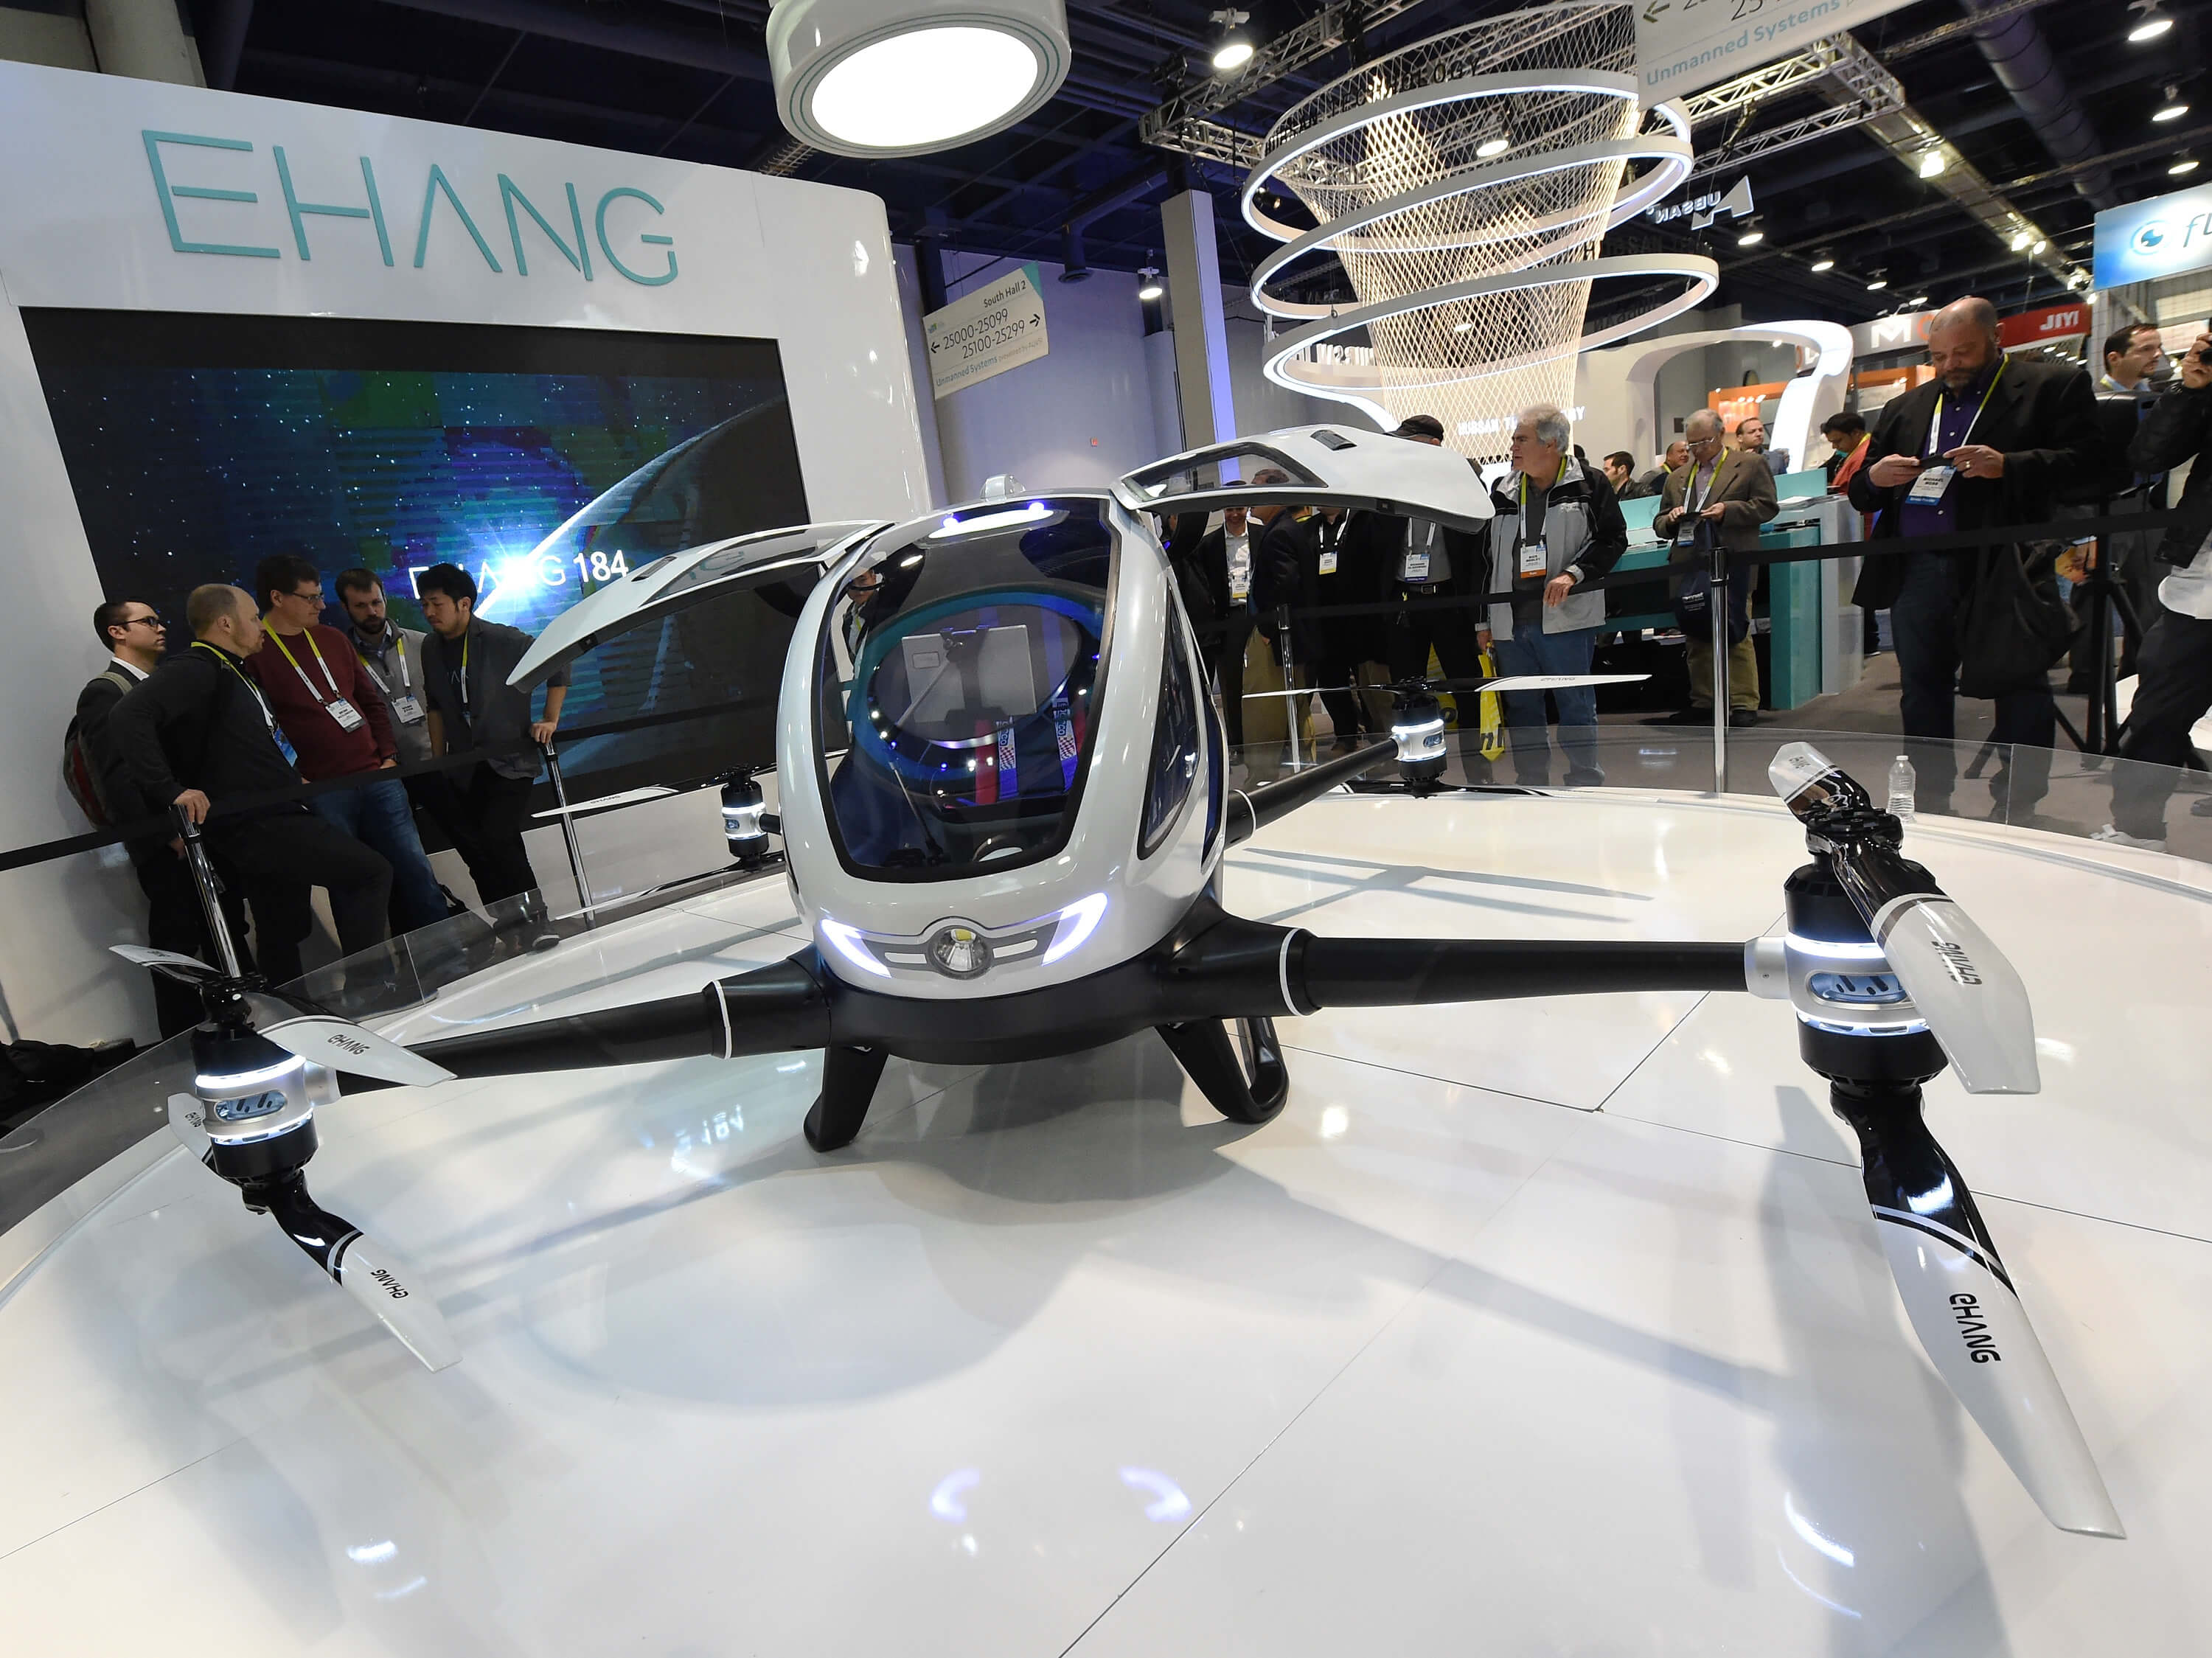 An EHang 184 autonomous-flight drone that can fly a person at CES 2016.